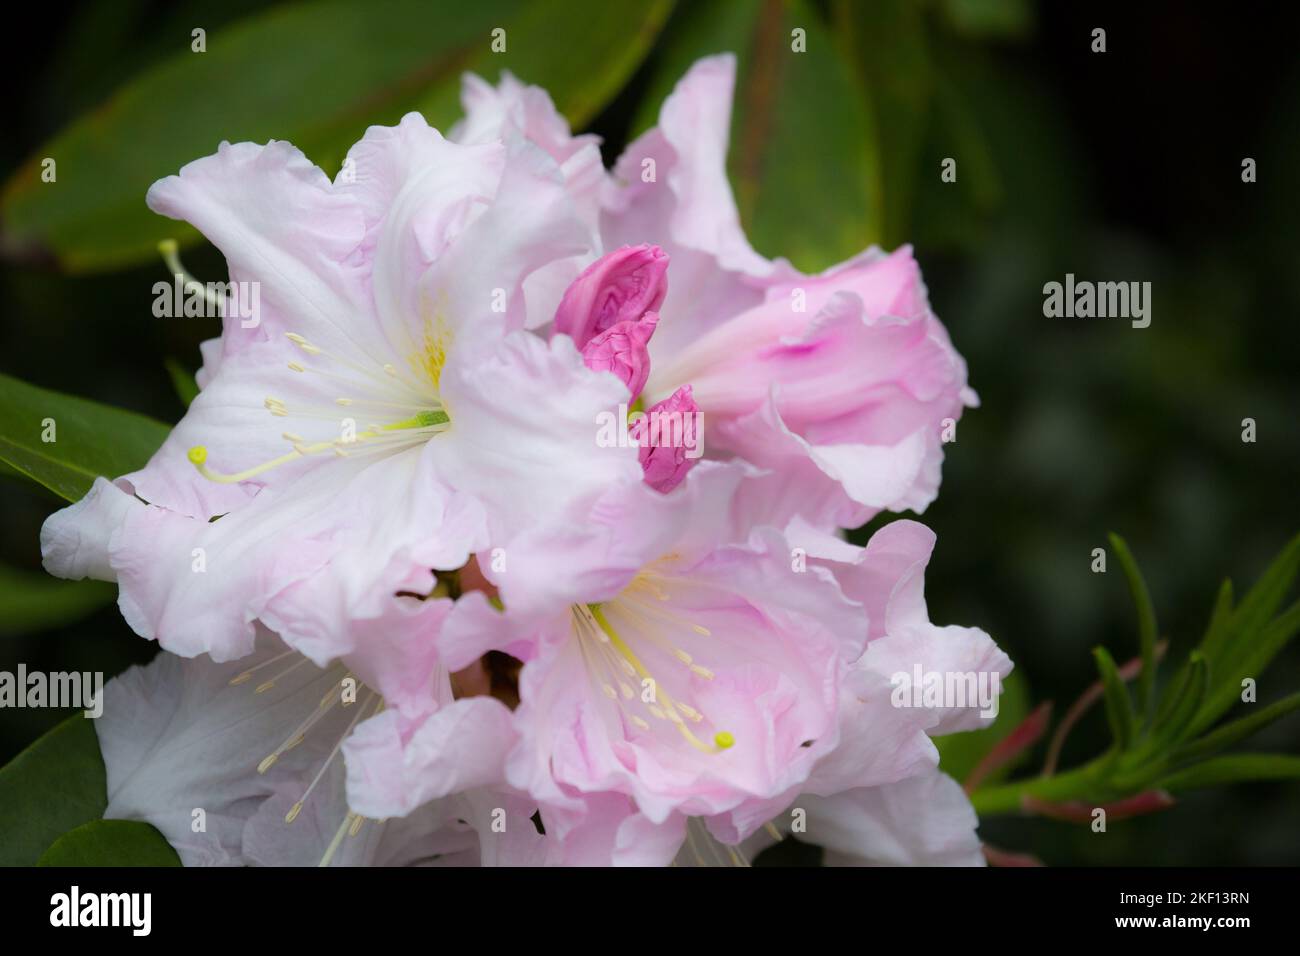 Beautiful pale pink Rhododendron blossoms. The core of the flowers has a delicate, spotted yellow pattern, the feather dusters are white. Stock Photo